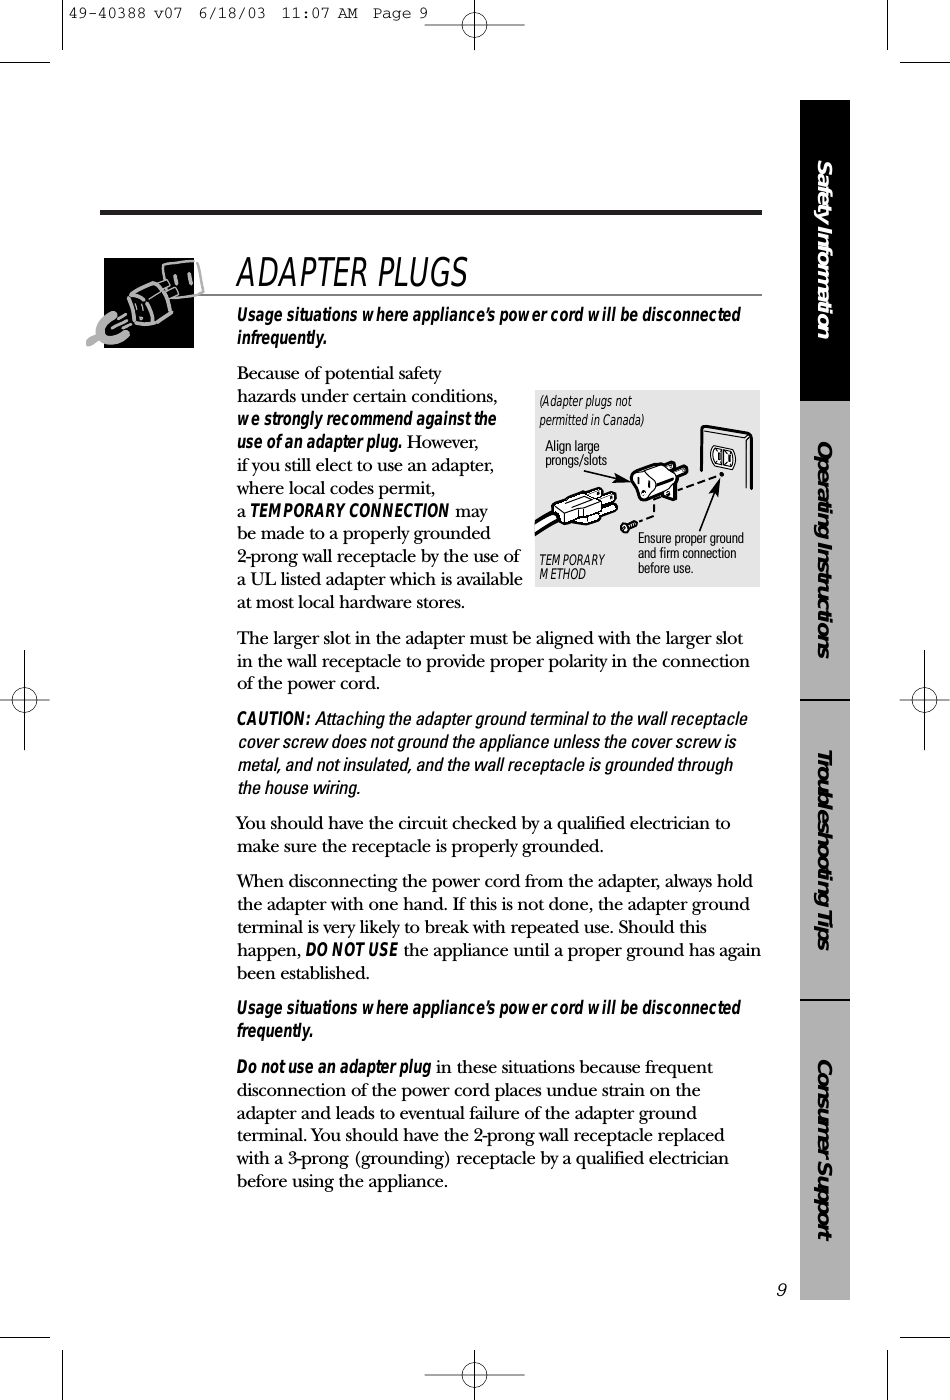 Consumer SupportTroubleshooting TipsOperating InstructionsSafety InformationUsage situations where appliance’s power cord will be disconnectedinfrequently.Because of potential safety hazards under certain conditions,we strongly recommend against the use of an adapter plug. However, if you still elect to use an adapter, where local codes permit, a TEMPORARY CONNECTION may be made to a properly grounded 2-prong wall receptacle by the use ofa UL listed adapter which is available at most local hardware stores.The larger slot in the adapter must be aligned with the larger slotin the wall receptacle to provide proper polarity in the connectionof the power cord.CAUTION: Attaching the adapter ground terminal to the wall receptaclecover screw does not ground the appliance unless the cover screw ismetal, and not insulated, and the wall receptacle is grounded through the house wiring. You should have the circuit checked by a qualified electrician tomake sure the receptacle is properly grounded.When disconnecting the power cord from the adapter, always holdthe adapter with one hand. If this is not done, the adapter groundterminal is very likely to break with repeated use. Should thishappen, DO NOT USE the appliance until a proper ground has againbeen established.Usage situations where appliance’s power cord will be disconnectedfrequently.Do not use an adapter plug in these situations because frequentdisconnection of the power cord places undue strain on theadapter and leads to eventual failure of the adapter groundterminal. You should have the 2-prong wall receptacle replacedwith a 3-prong (grounding) receptacle by a qualified electricianbefore using the appliance.ADAPTER PLUGS9Ensure proper ground and firm connectionbefore use.TEMPORARYMETHODAlign largeprongs/slots(Adapter plugs notpermitted in Canada)49-40388 v07  6/18/03  11:07 AM  Page 9